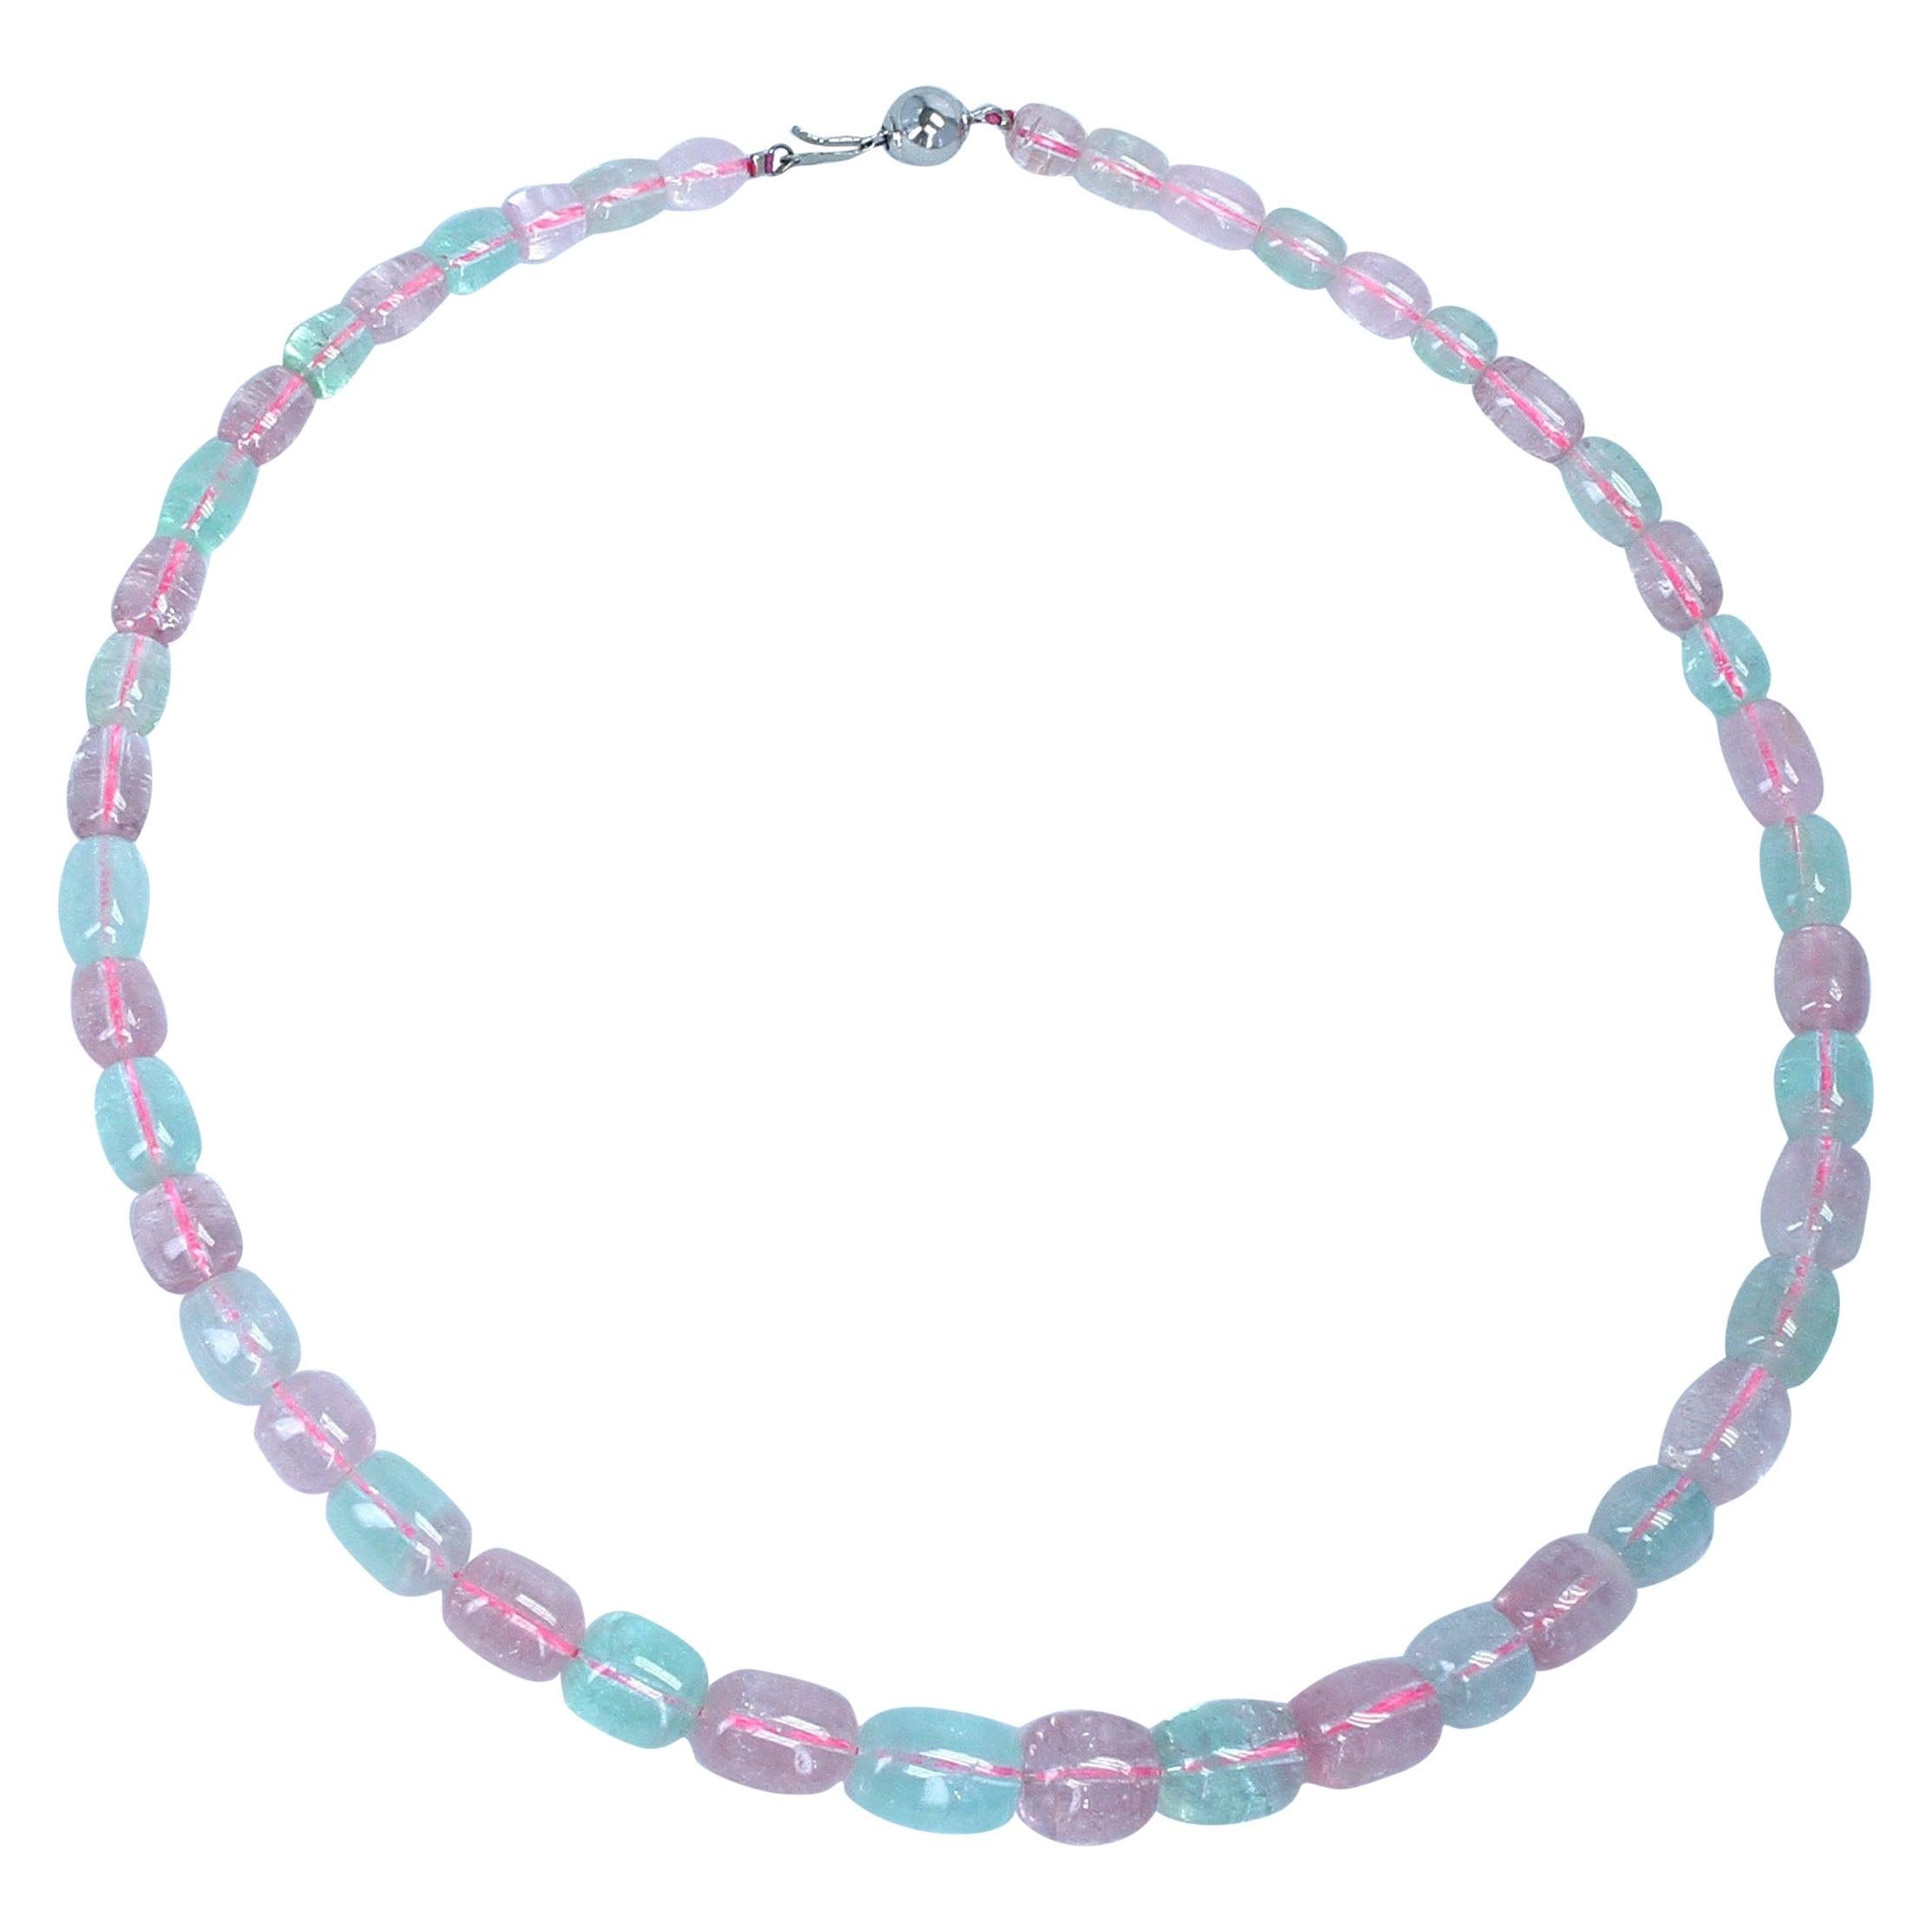 A strand of Pink and Green Smooth and Tumbled Tourmaline Beads, 14K Clasp. Clasp can be changed according to preference. Length: 20 Inches, Bead Range: 7MM to 15MM, Total Weight: 400 carats.